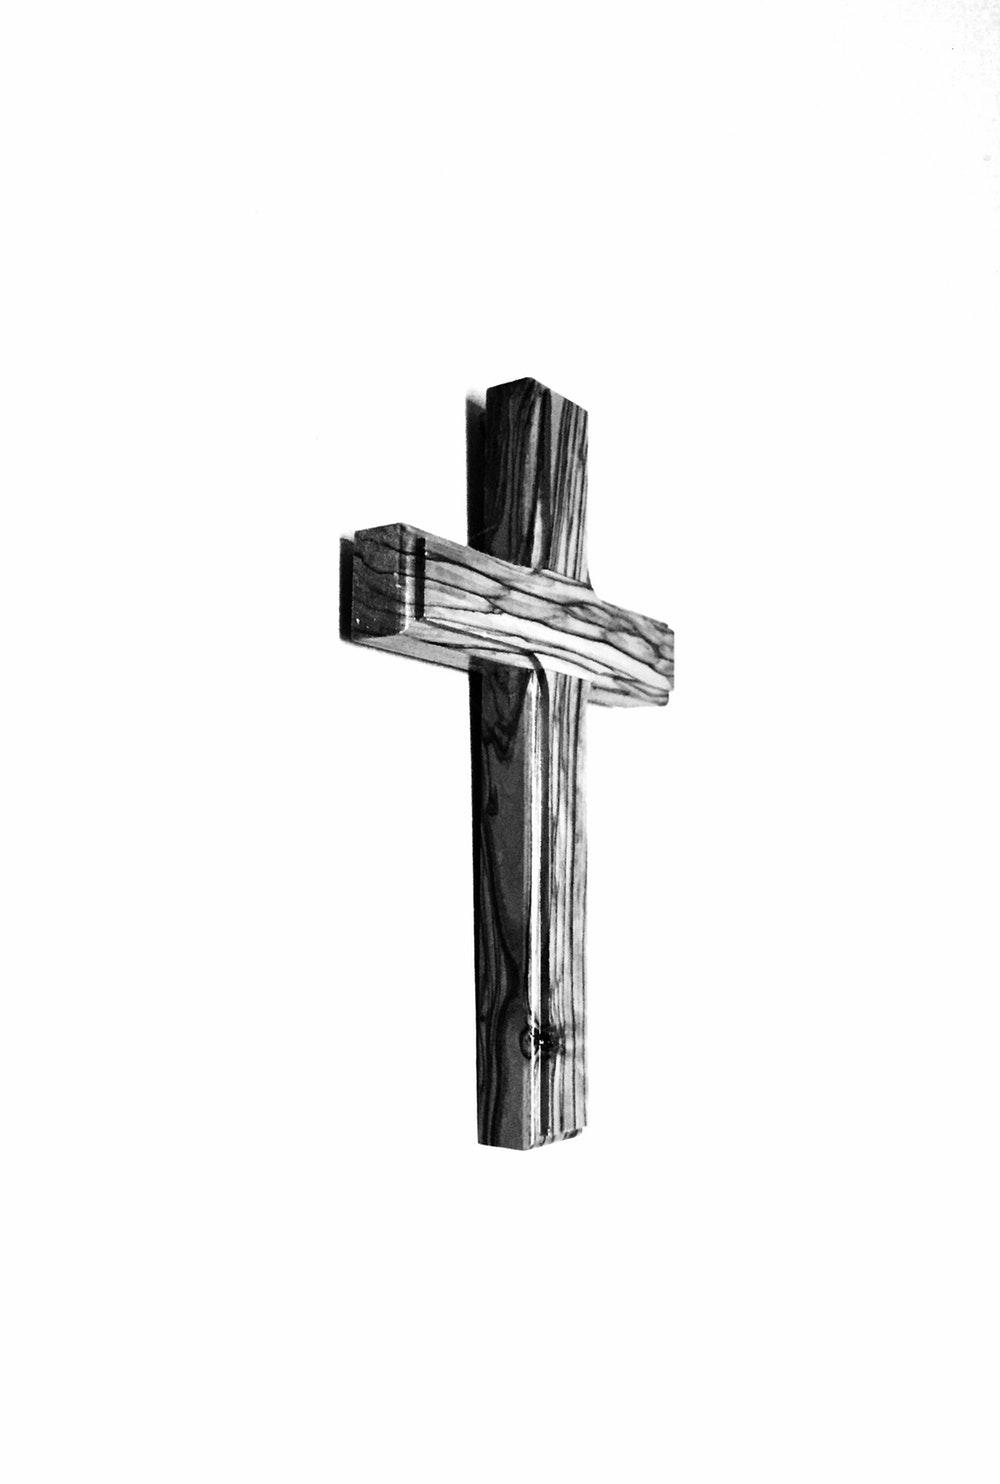 Cross Picture [HD]. Download Free Image